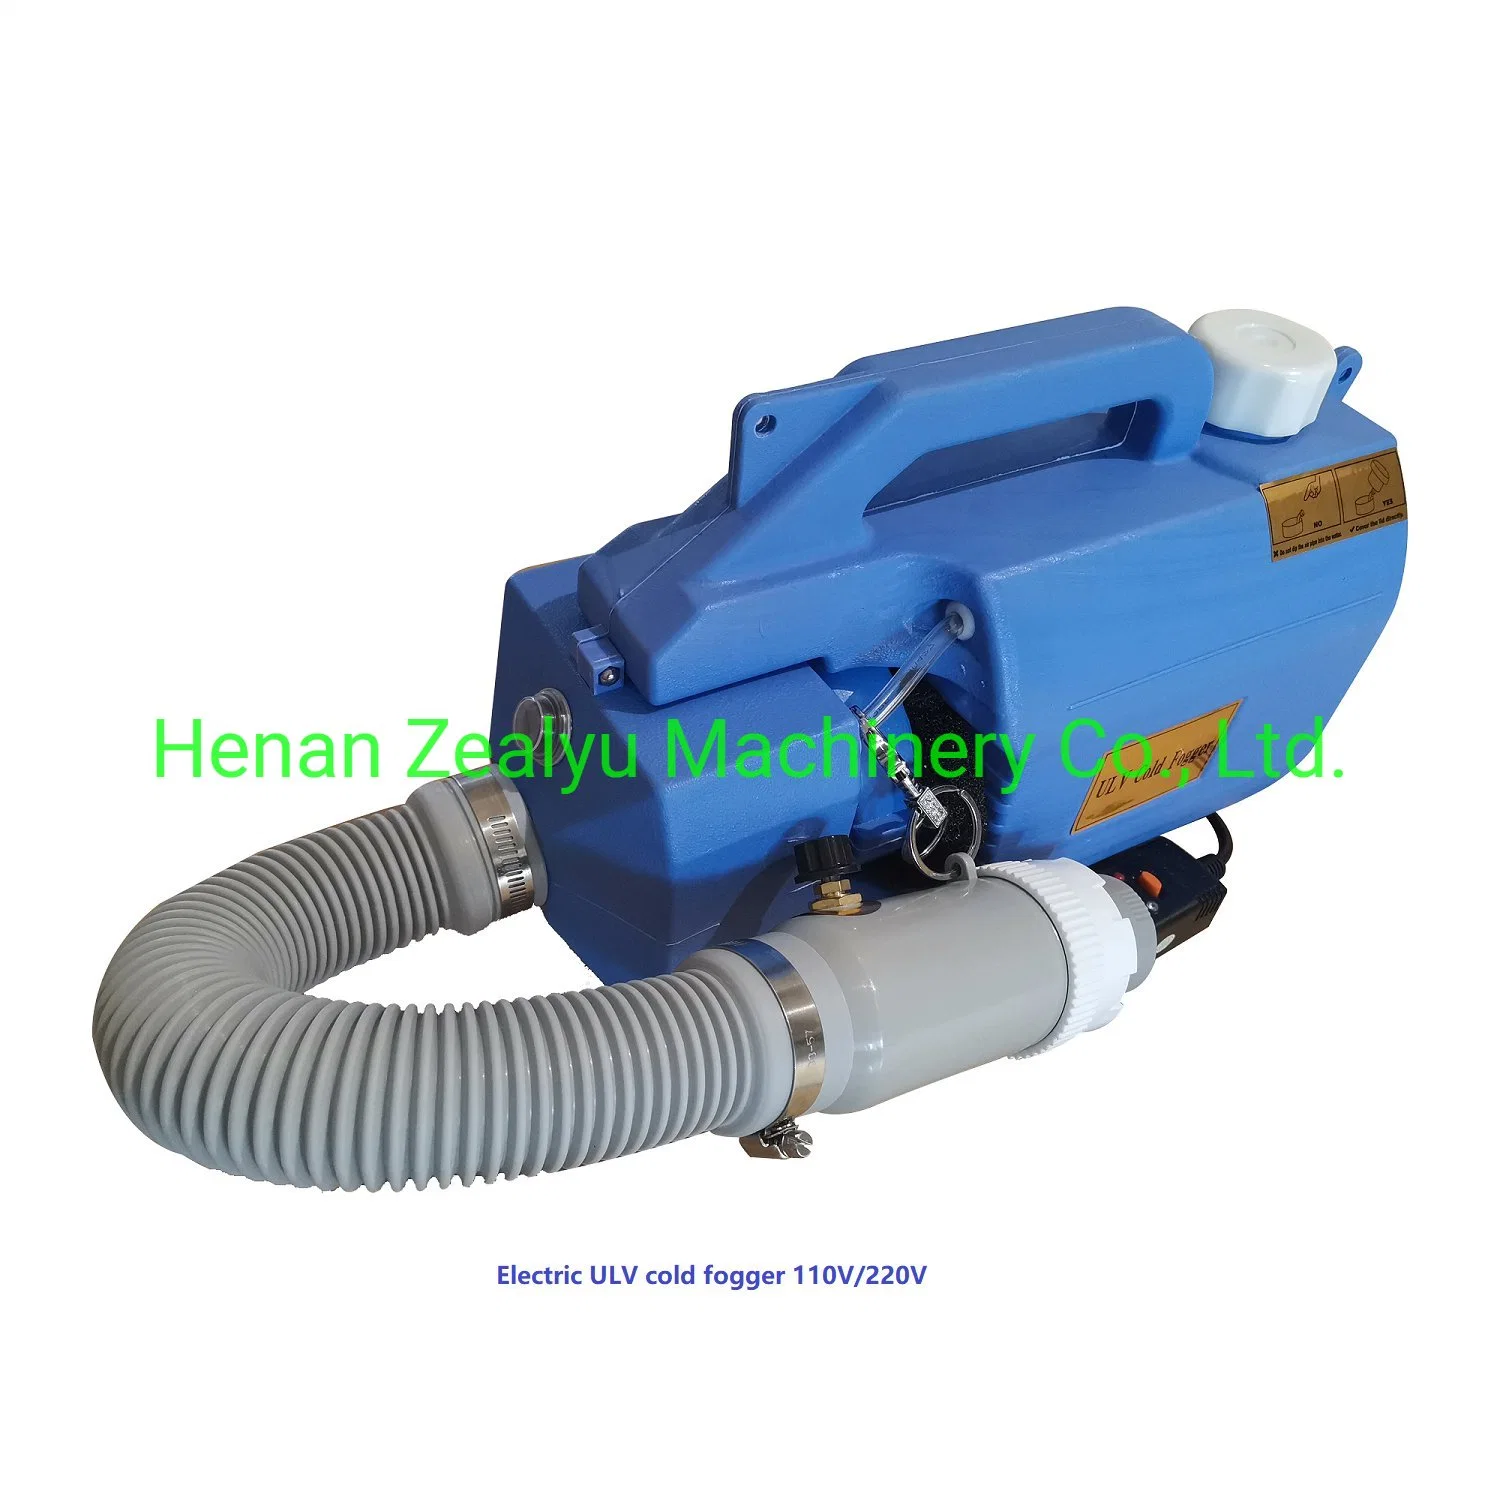 5L Electric Ulv-500 Fogger Sprayer with Locking-Water Function Cold Fogging Machine 8m Disinfection Atomizer with Funne